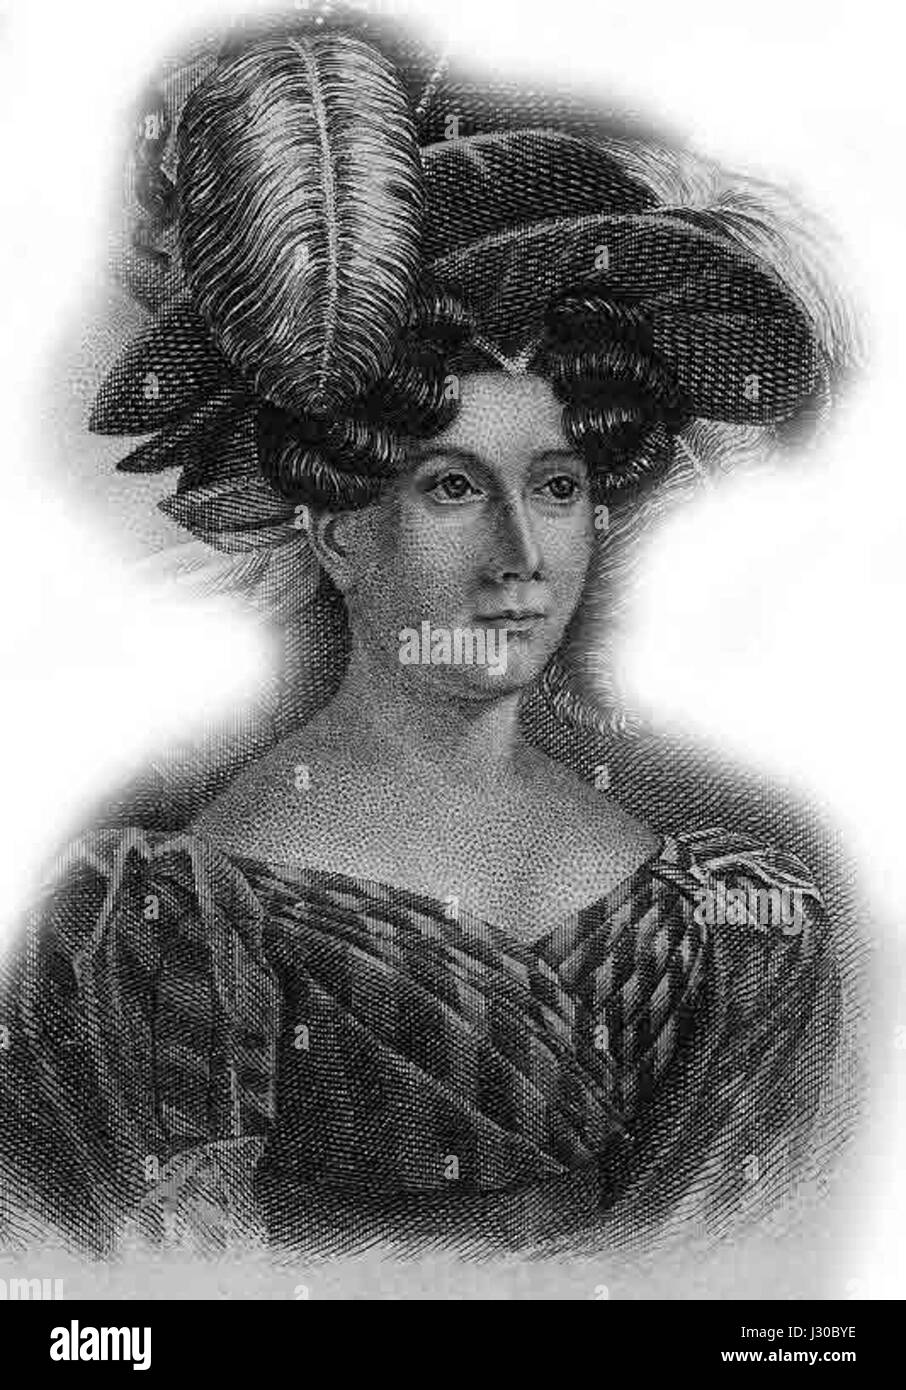 File:PPN663959438 Angelica Catalani.jpg - Wikimedia Commons